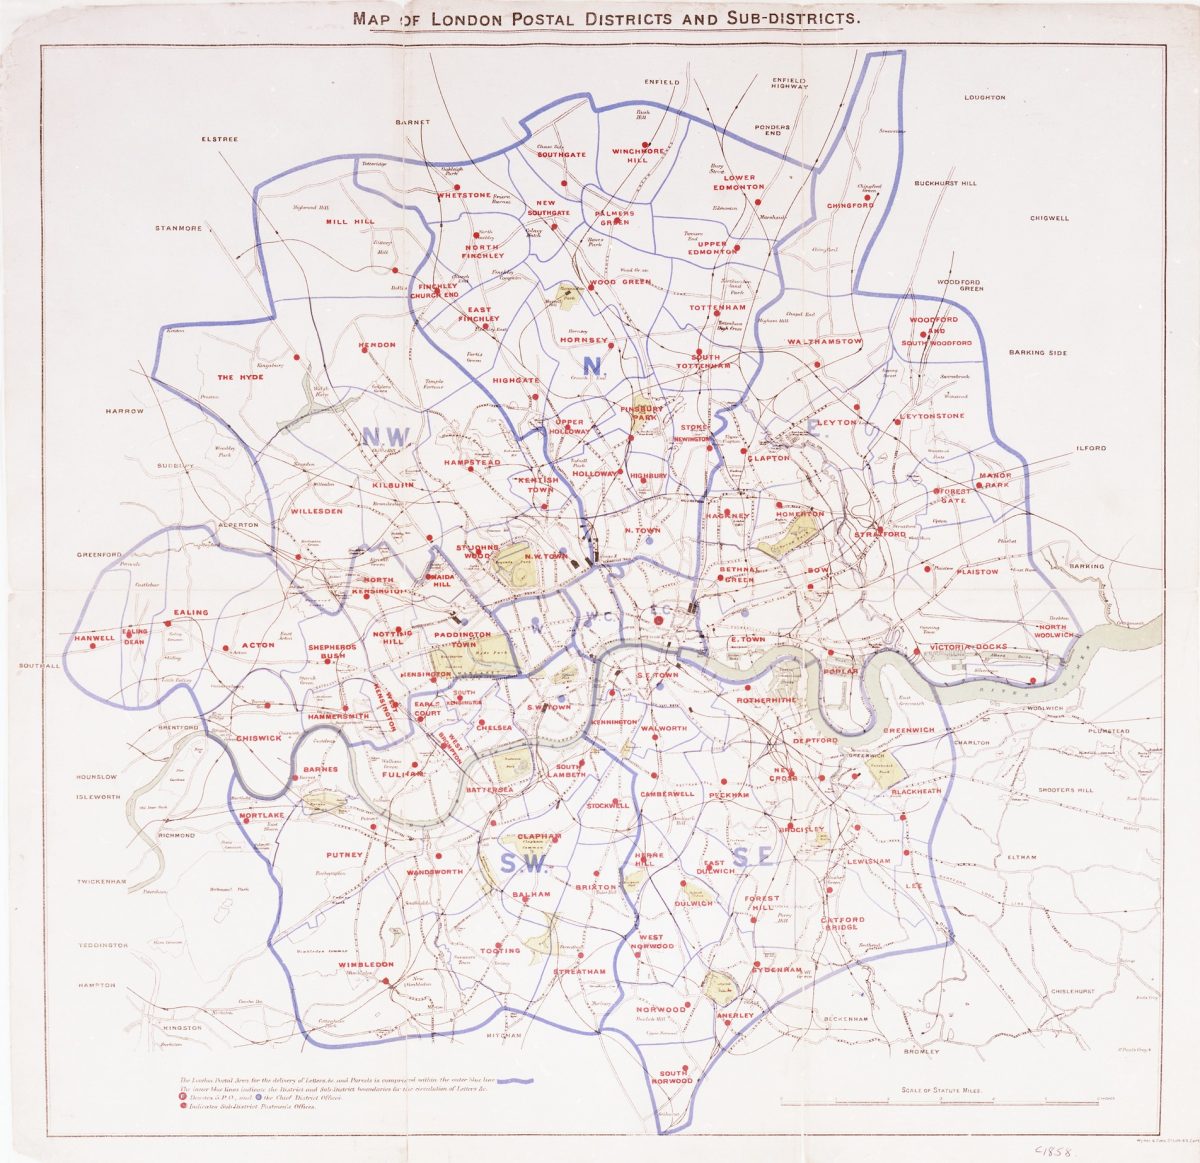 A large map with the heading 'Map of London Postal Districts and Sub-Districts'.